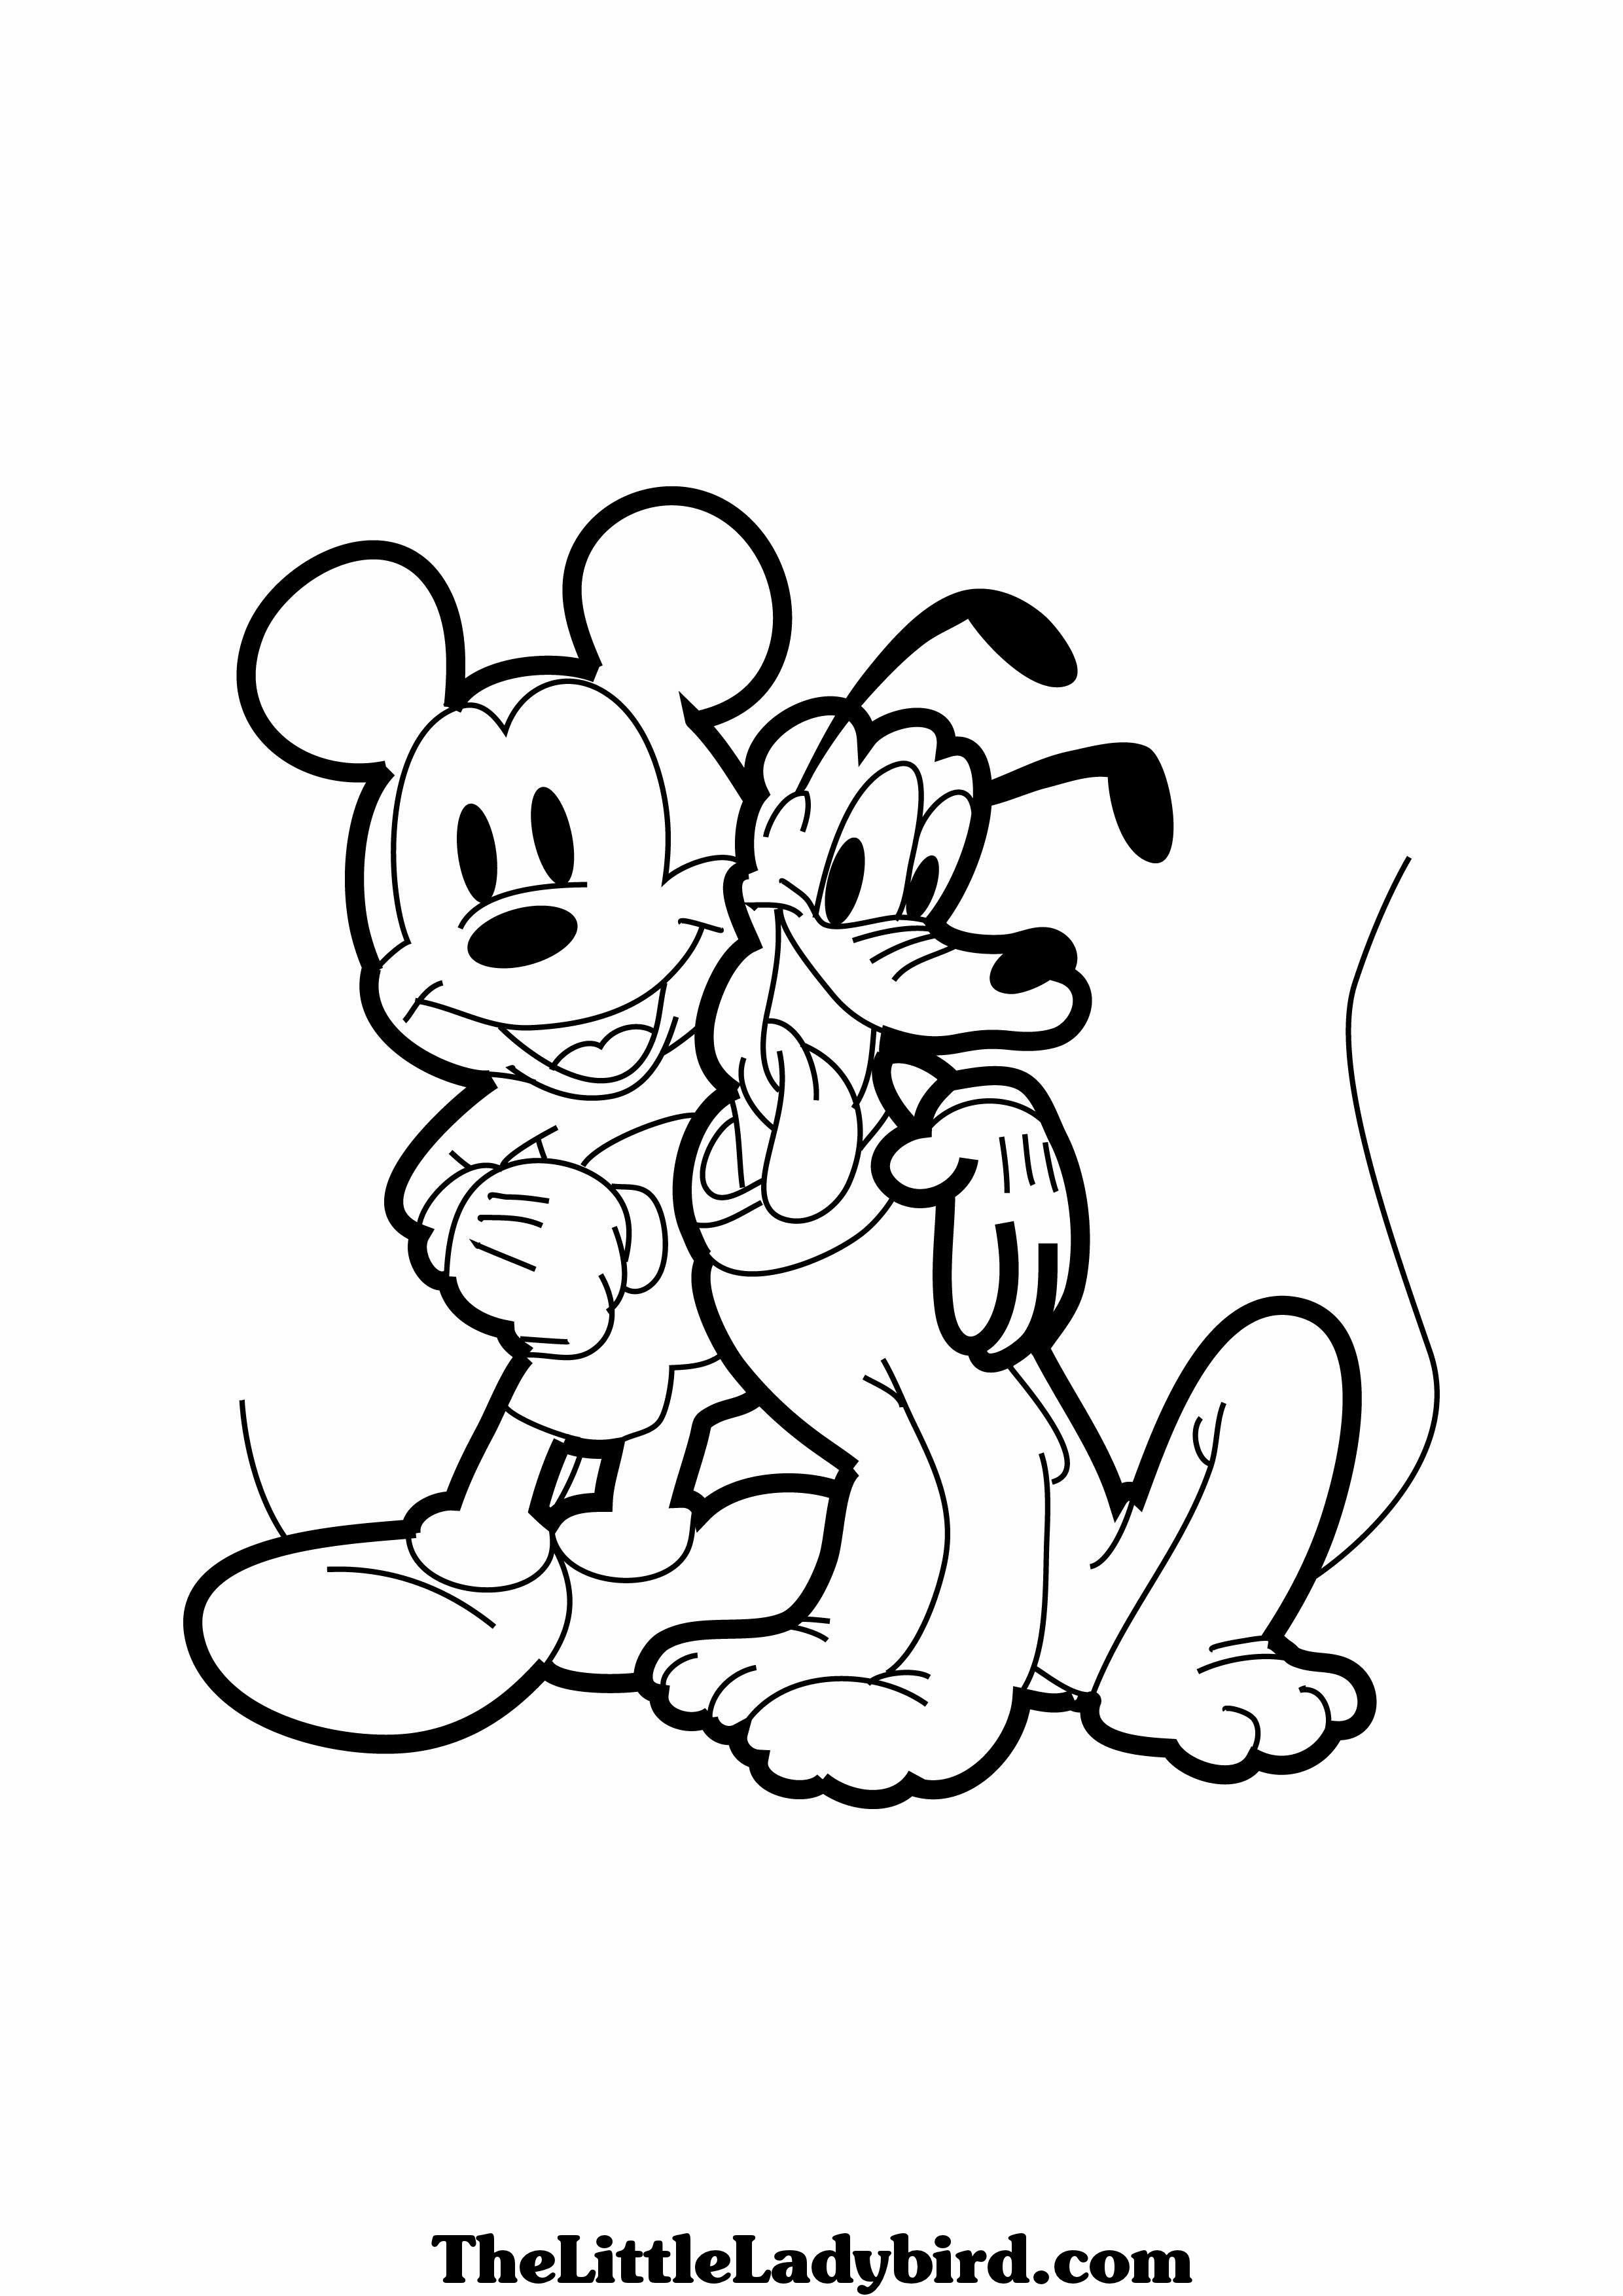 Pluto Coloring Pages Free Mickey Pluto Coloring Page Thelittleladybird